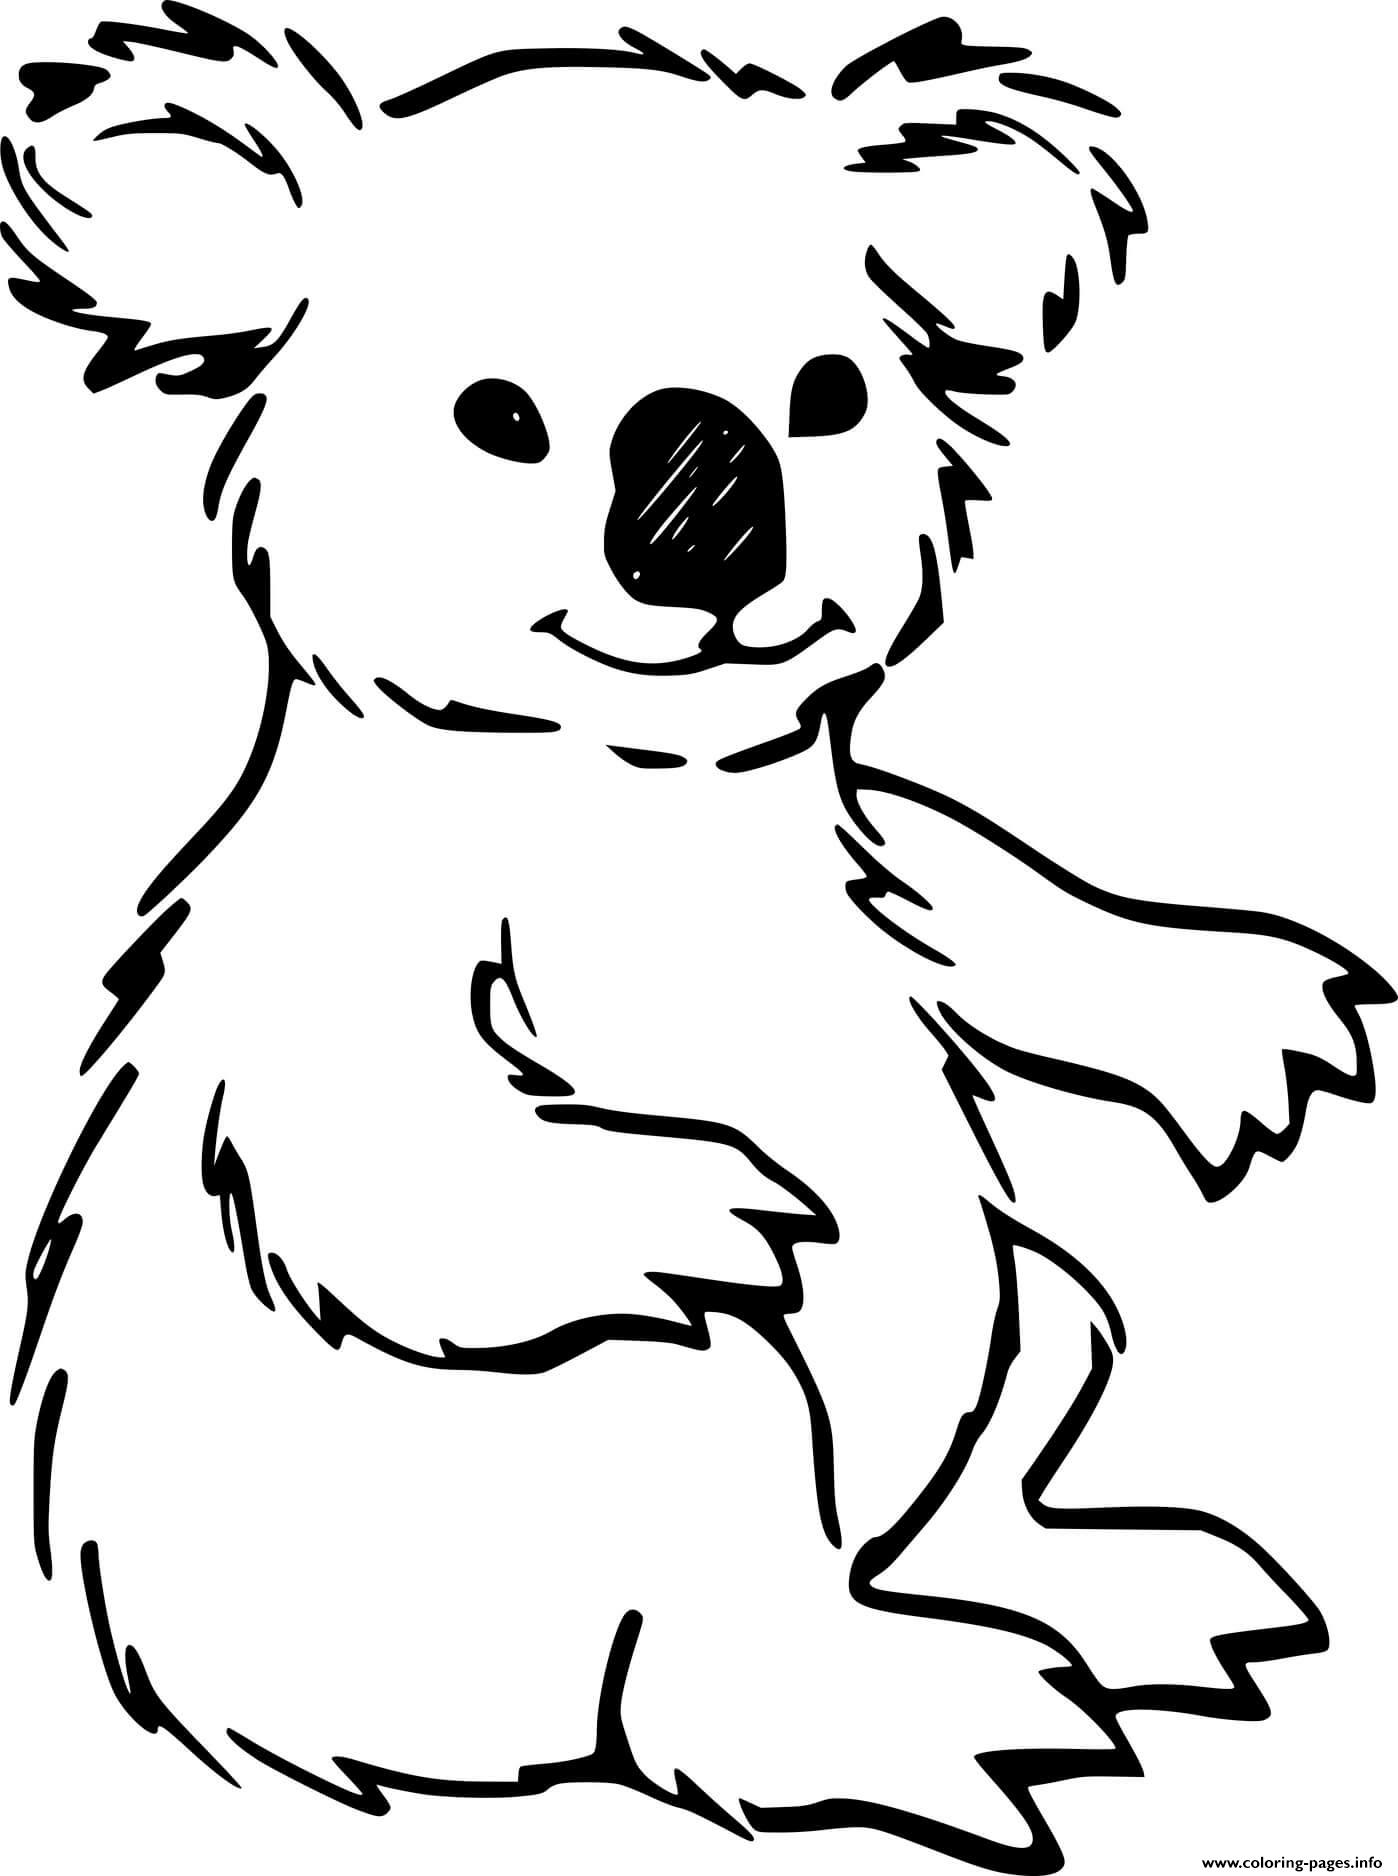 Realistic Koala Sits On The Ground coloring